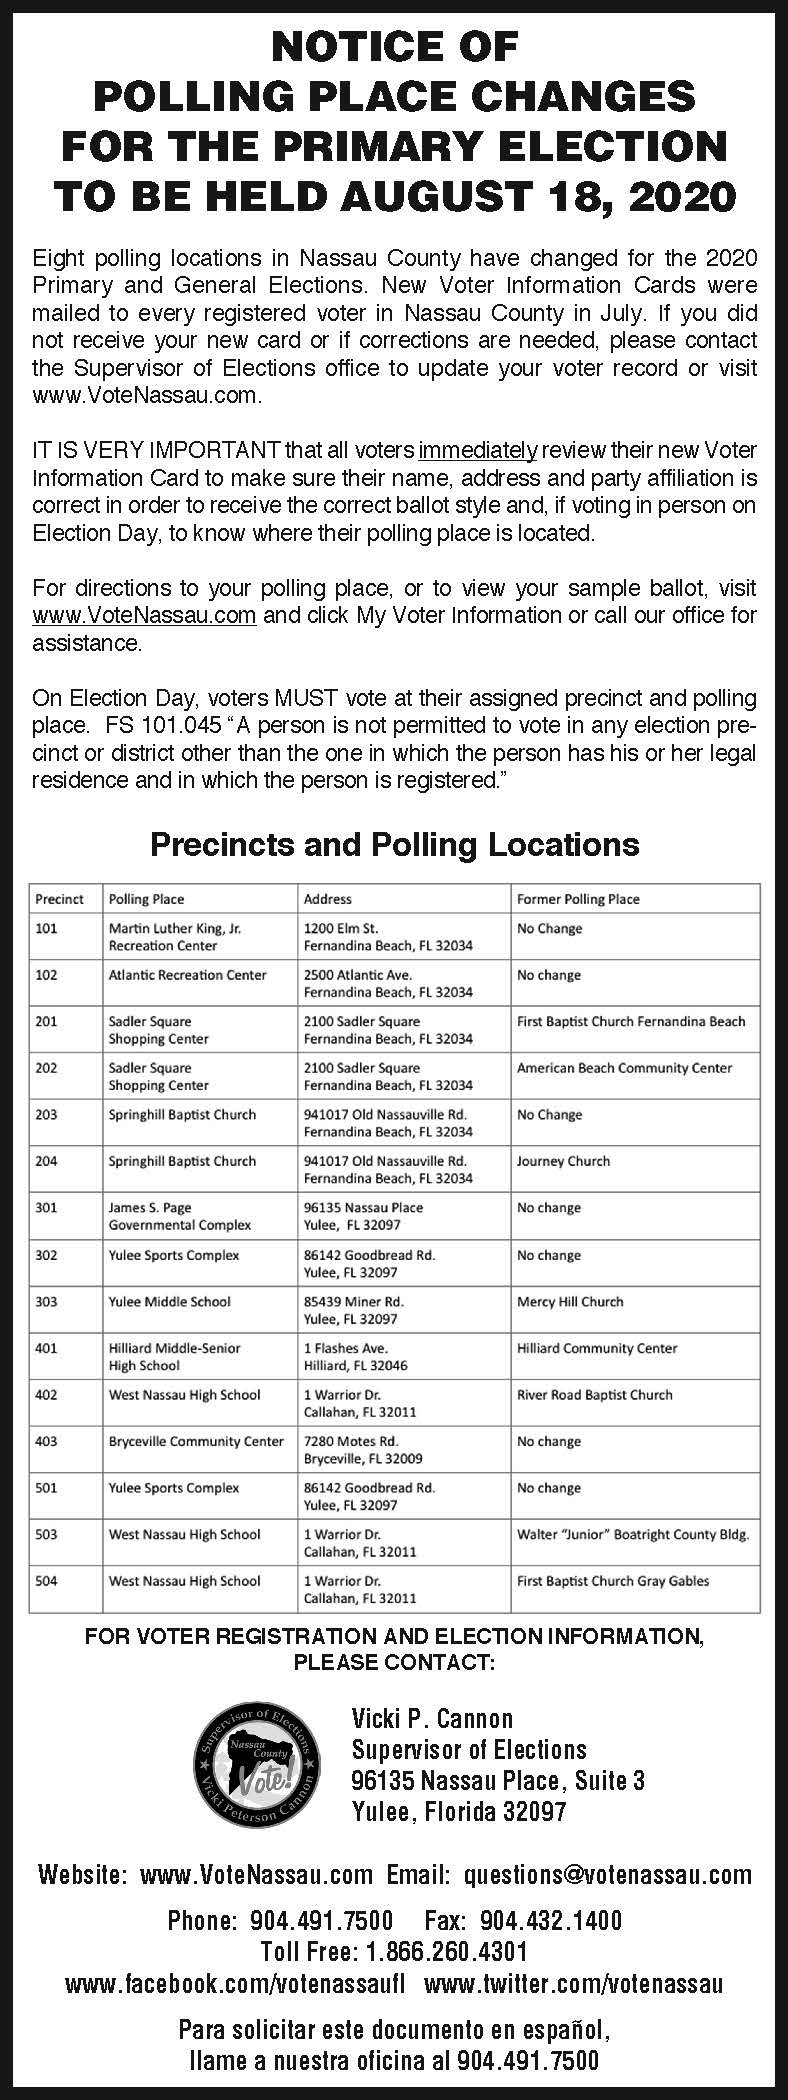 NOTICE OF POLLING PLACE CHANGES FOR THE PRIMARY ELECTION TO BE HELD